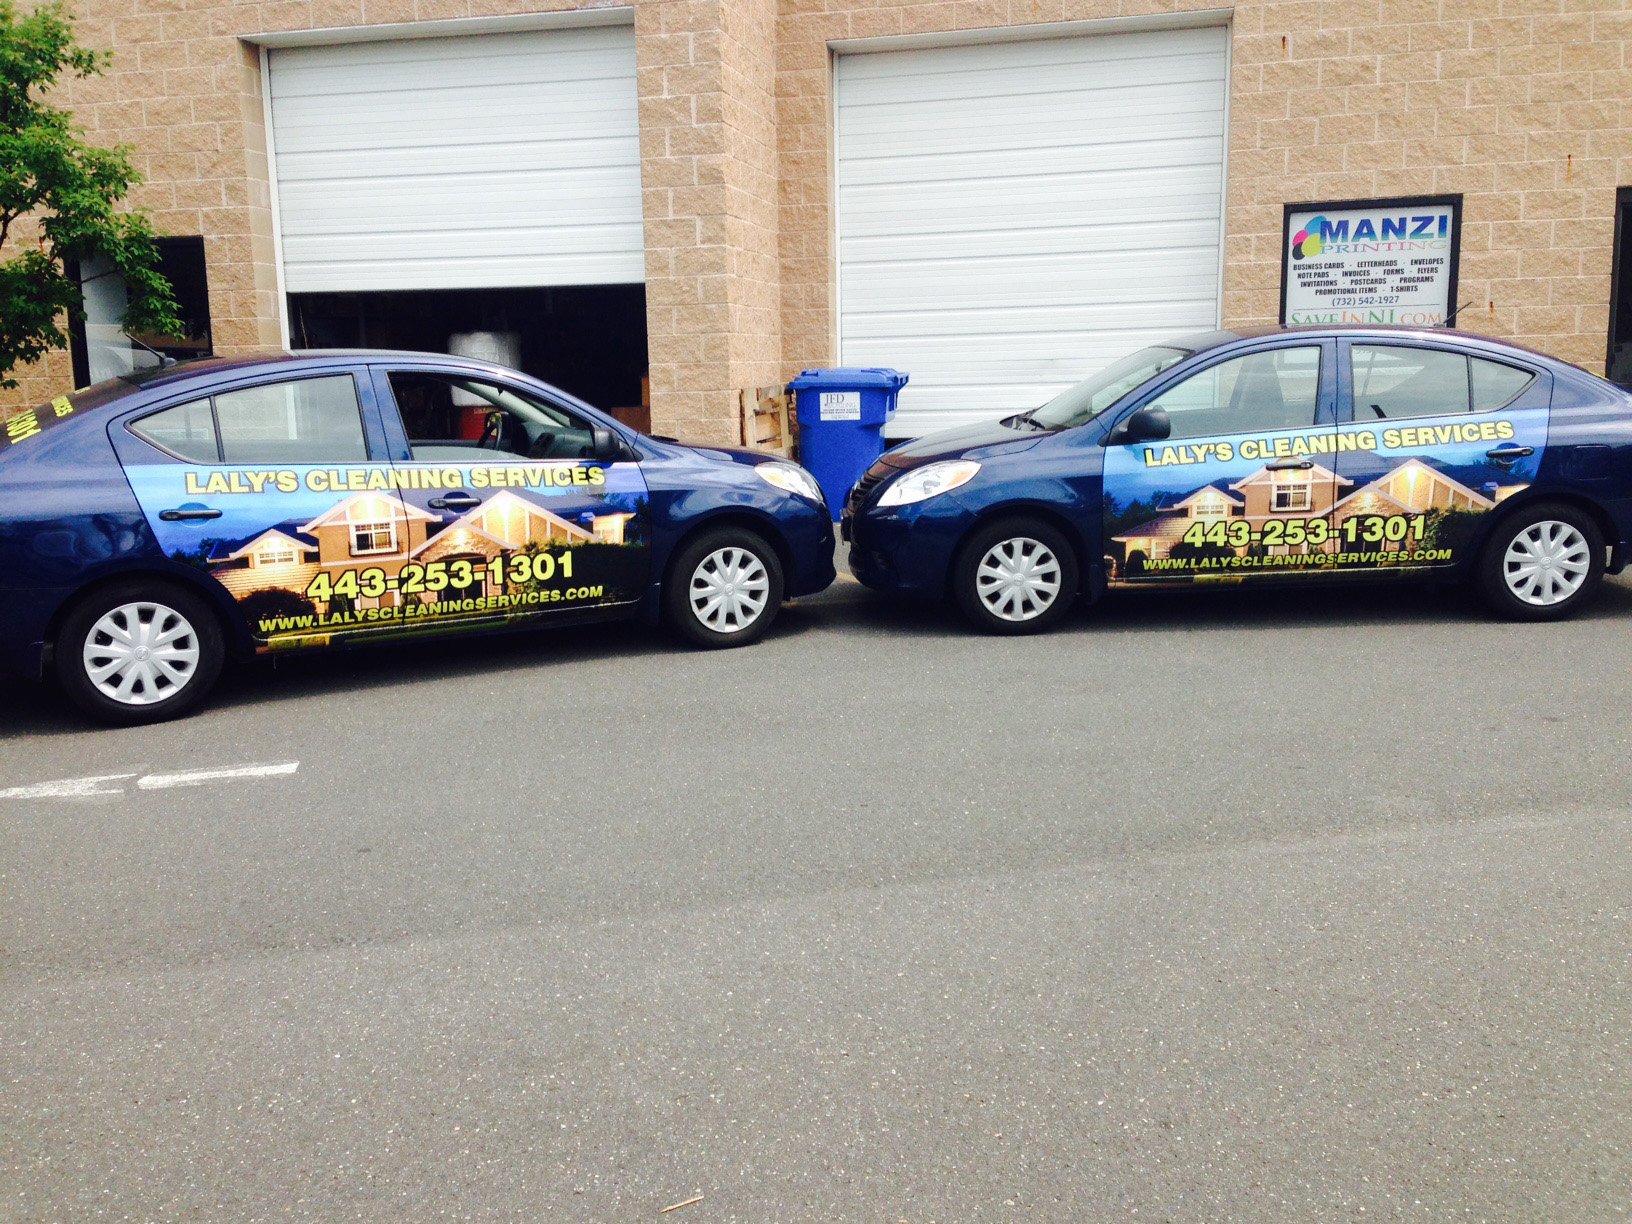 Laly's Cleaning Services Car Fleet Printed Vinyl Wrap